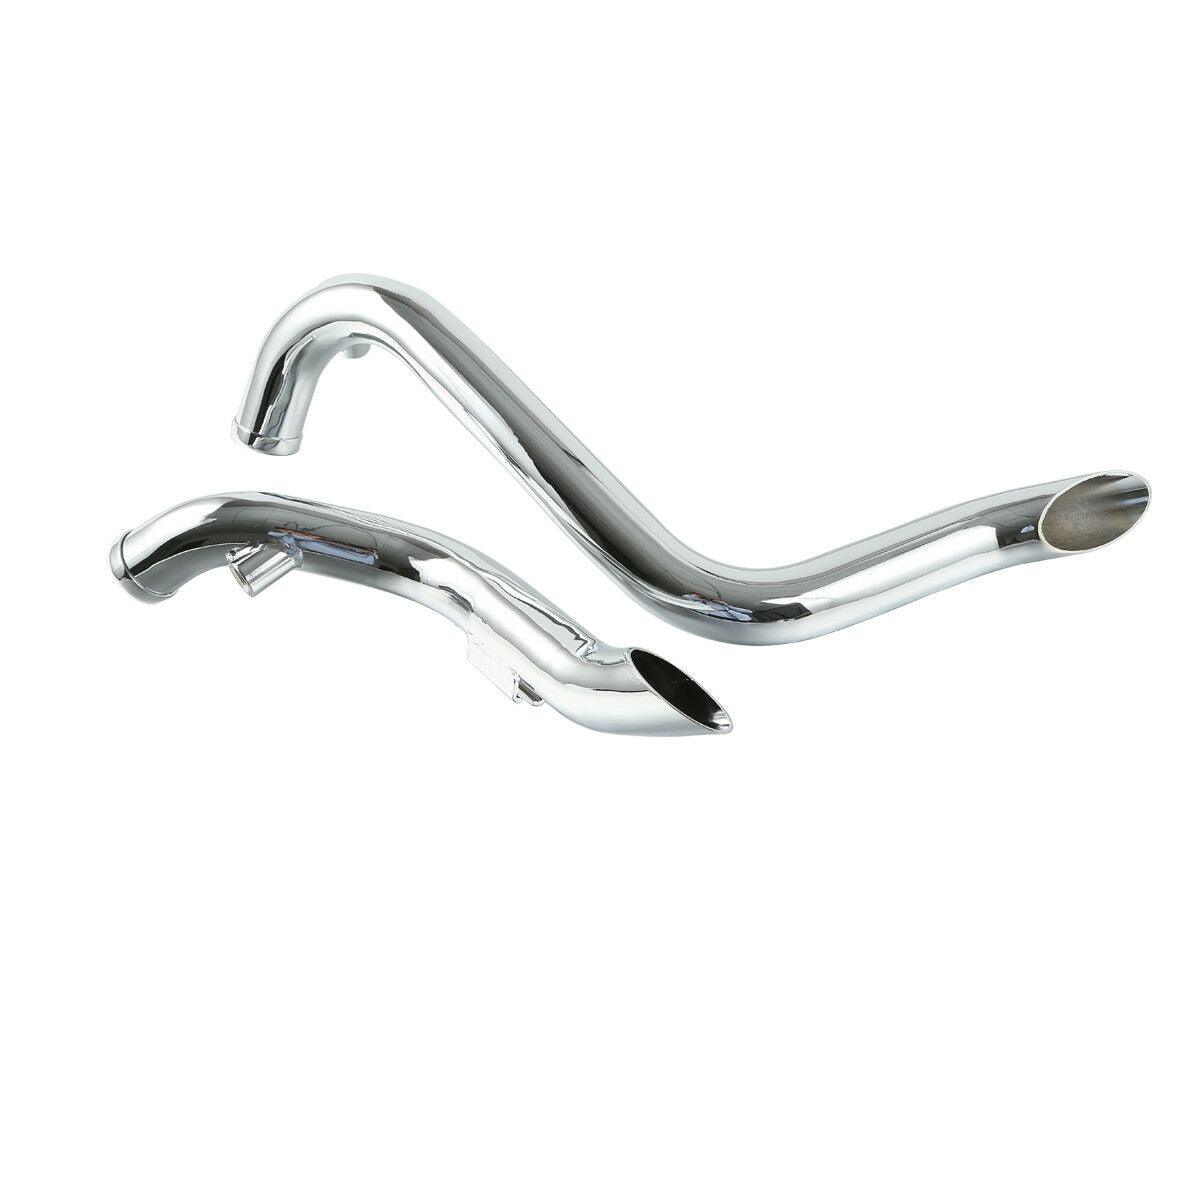 Chrome 1.75" Pipes Exhaust Fit For Harley Softail Sportster Touring Drag 84-16 - Moto Life Products